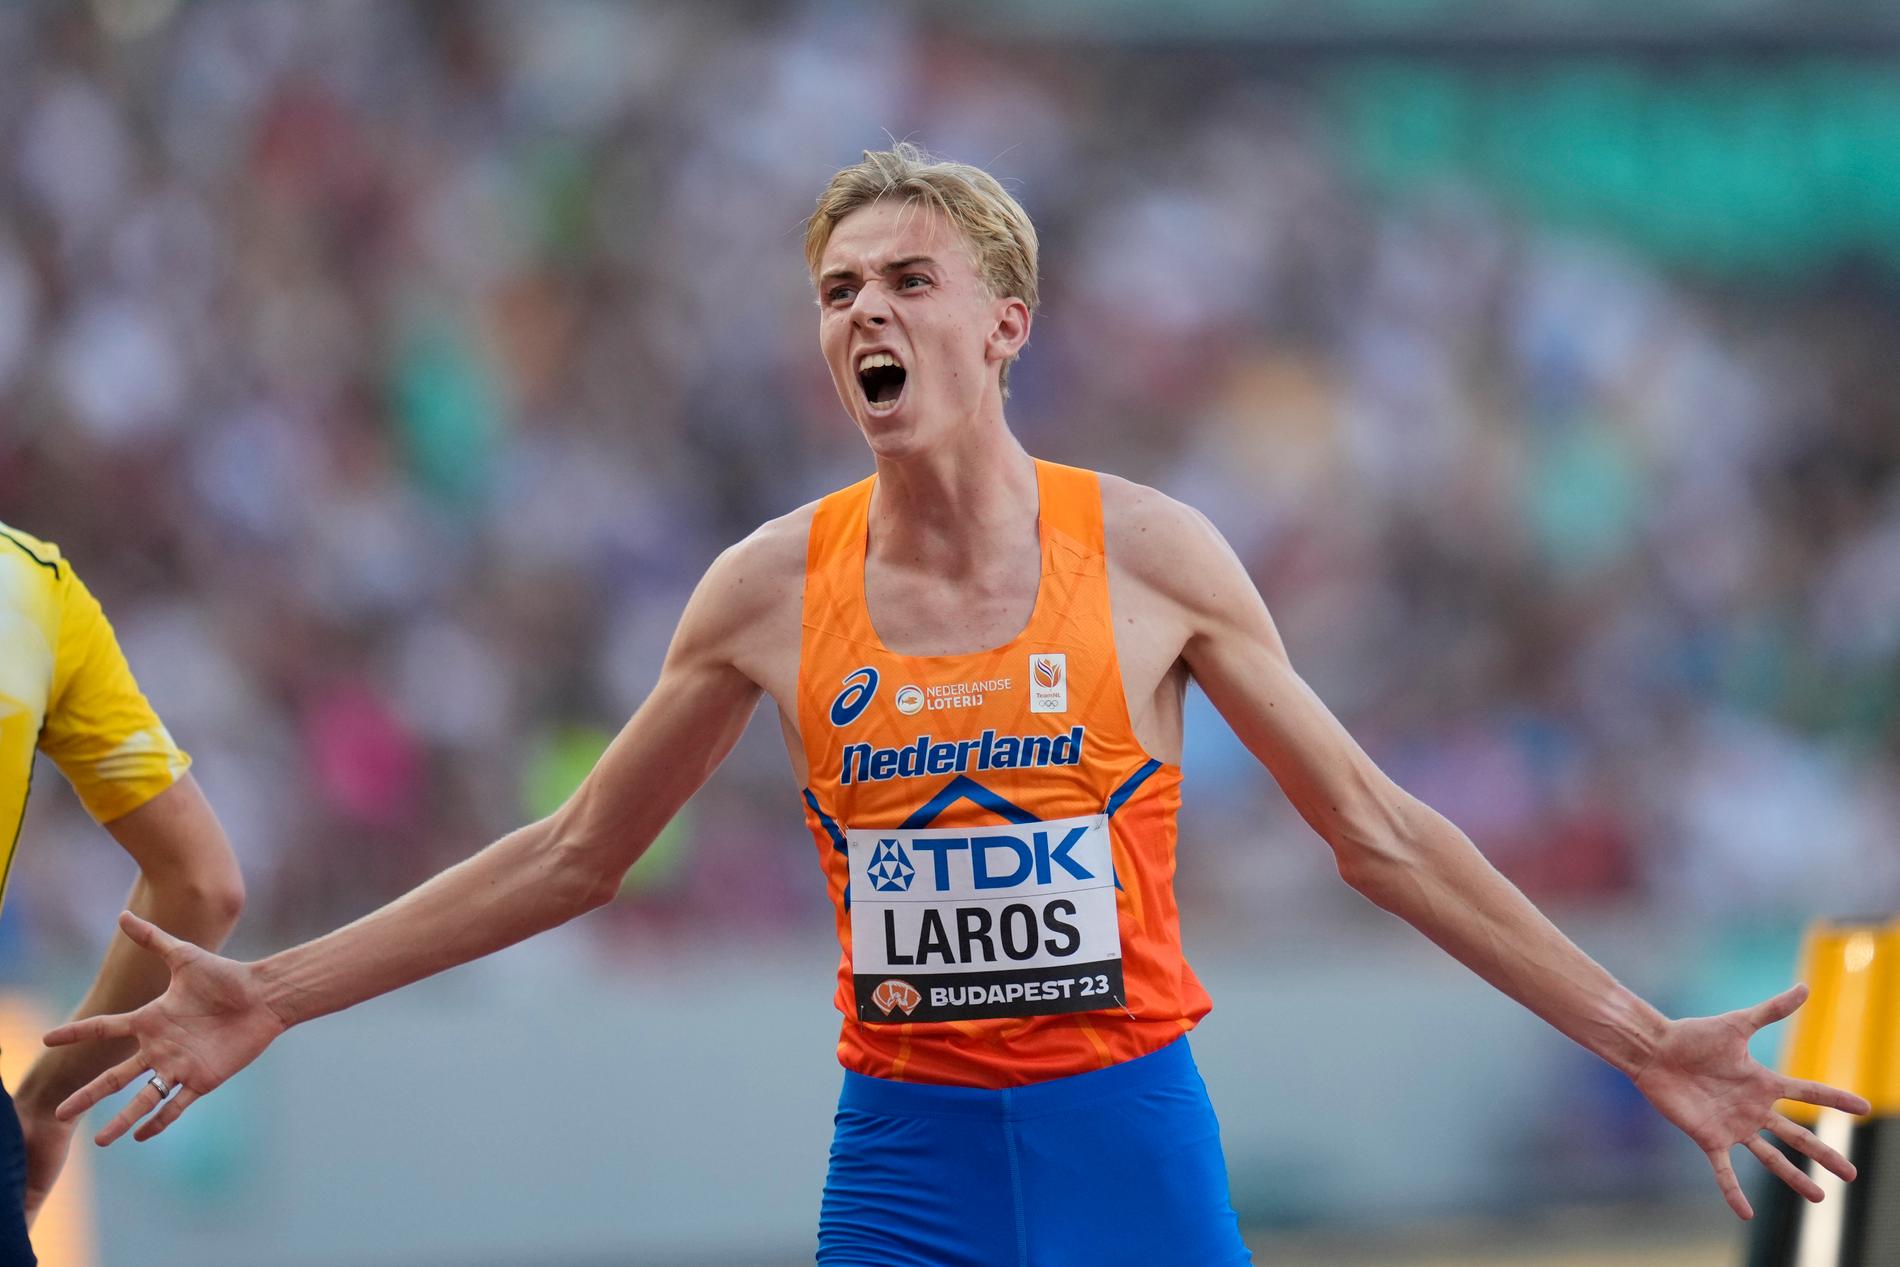 18-year-old Niels Larousse from the Netherlands is making a fuss: – A talent the size of Jacob